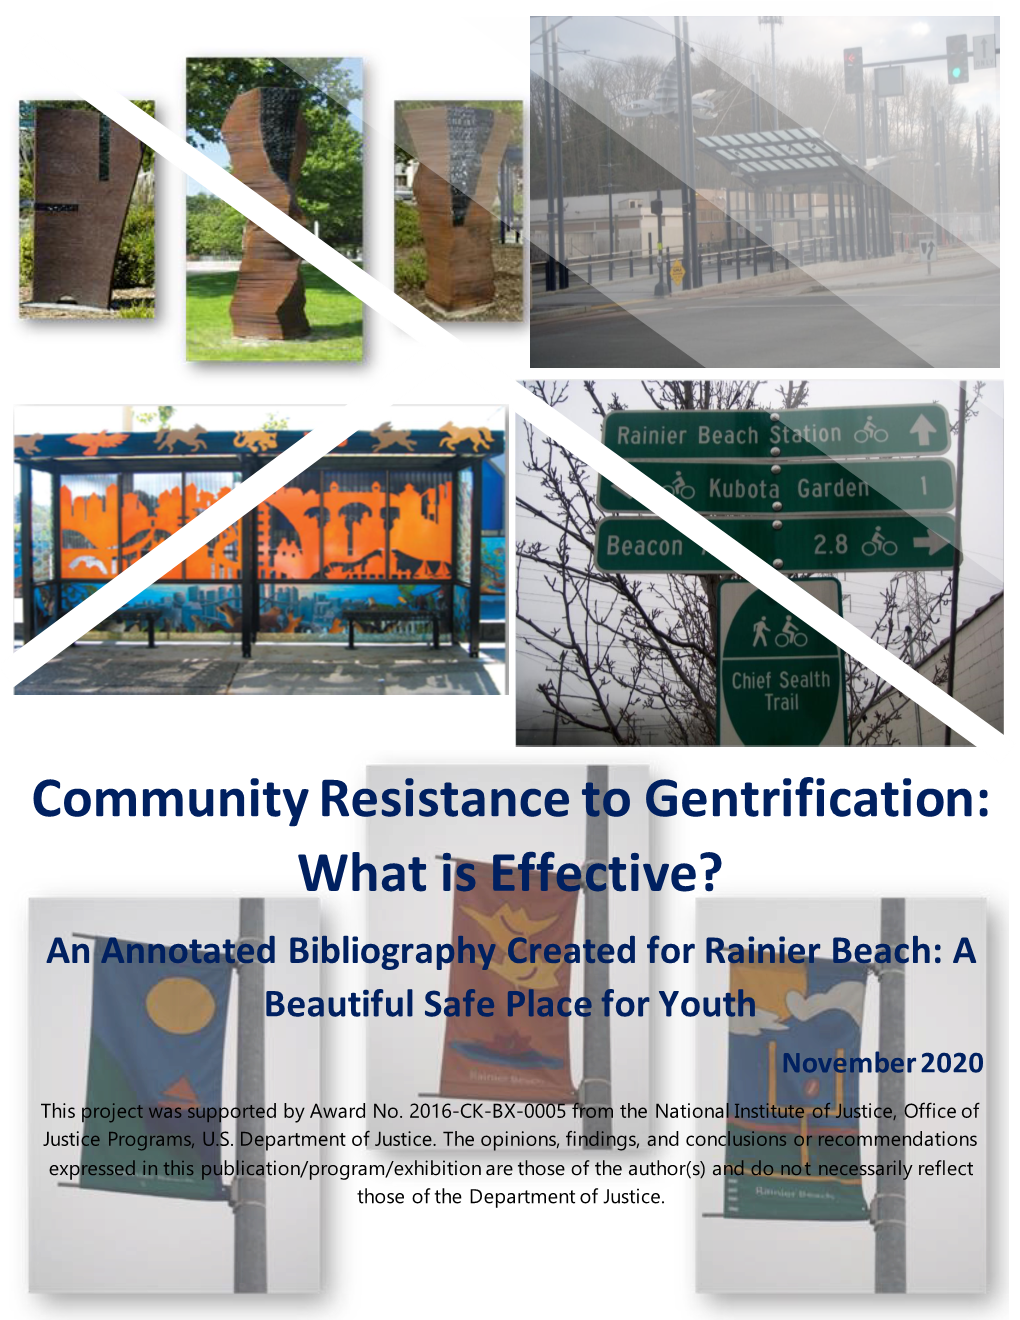 Community Resistance to Gentrification: What Is Effective?